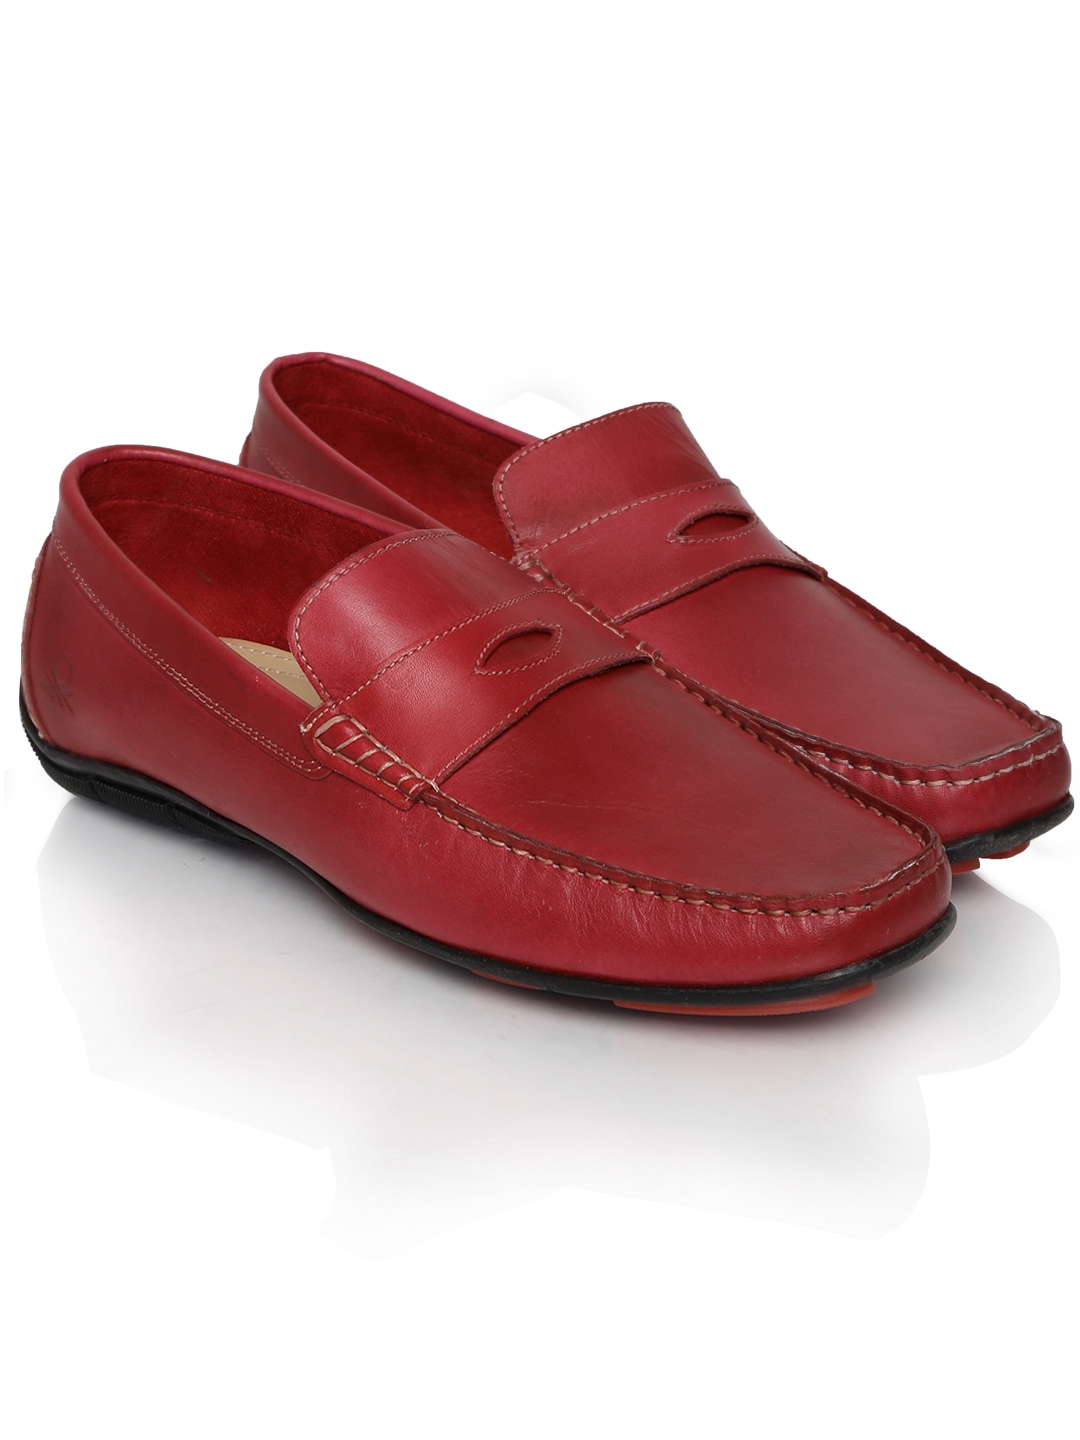 Buy United Colors Of Benetton Men Red Leather Loafers - Casual Shoes ...